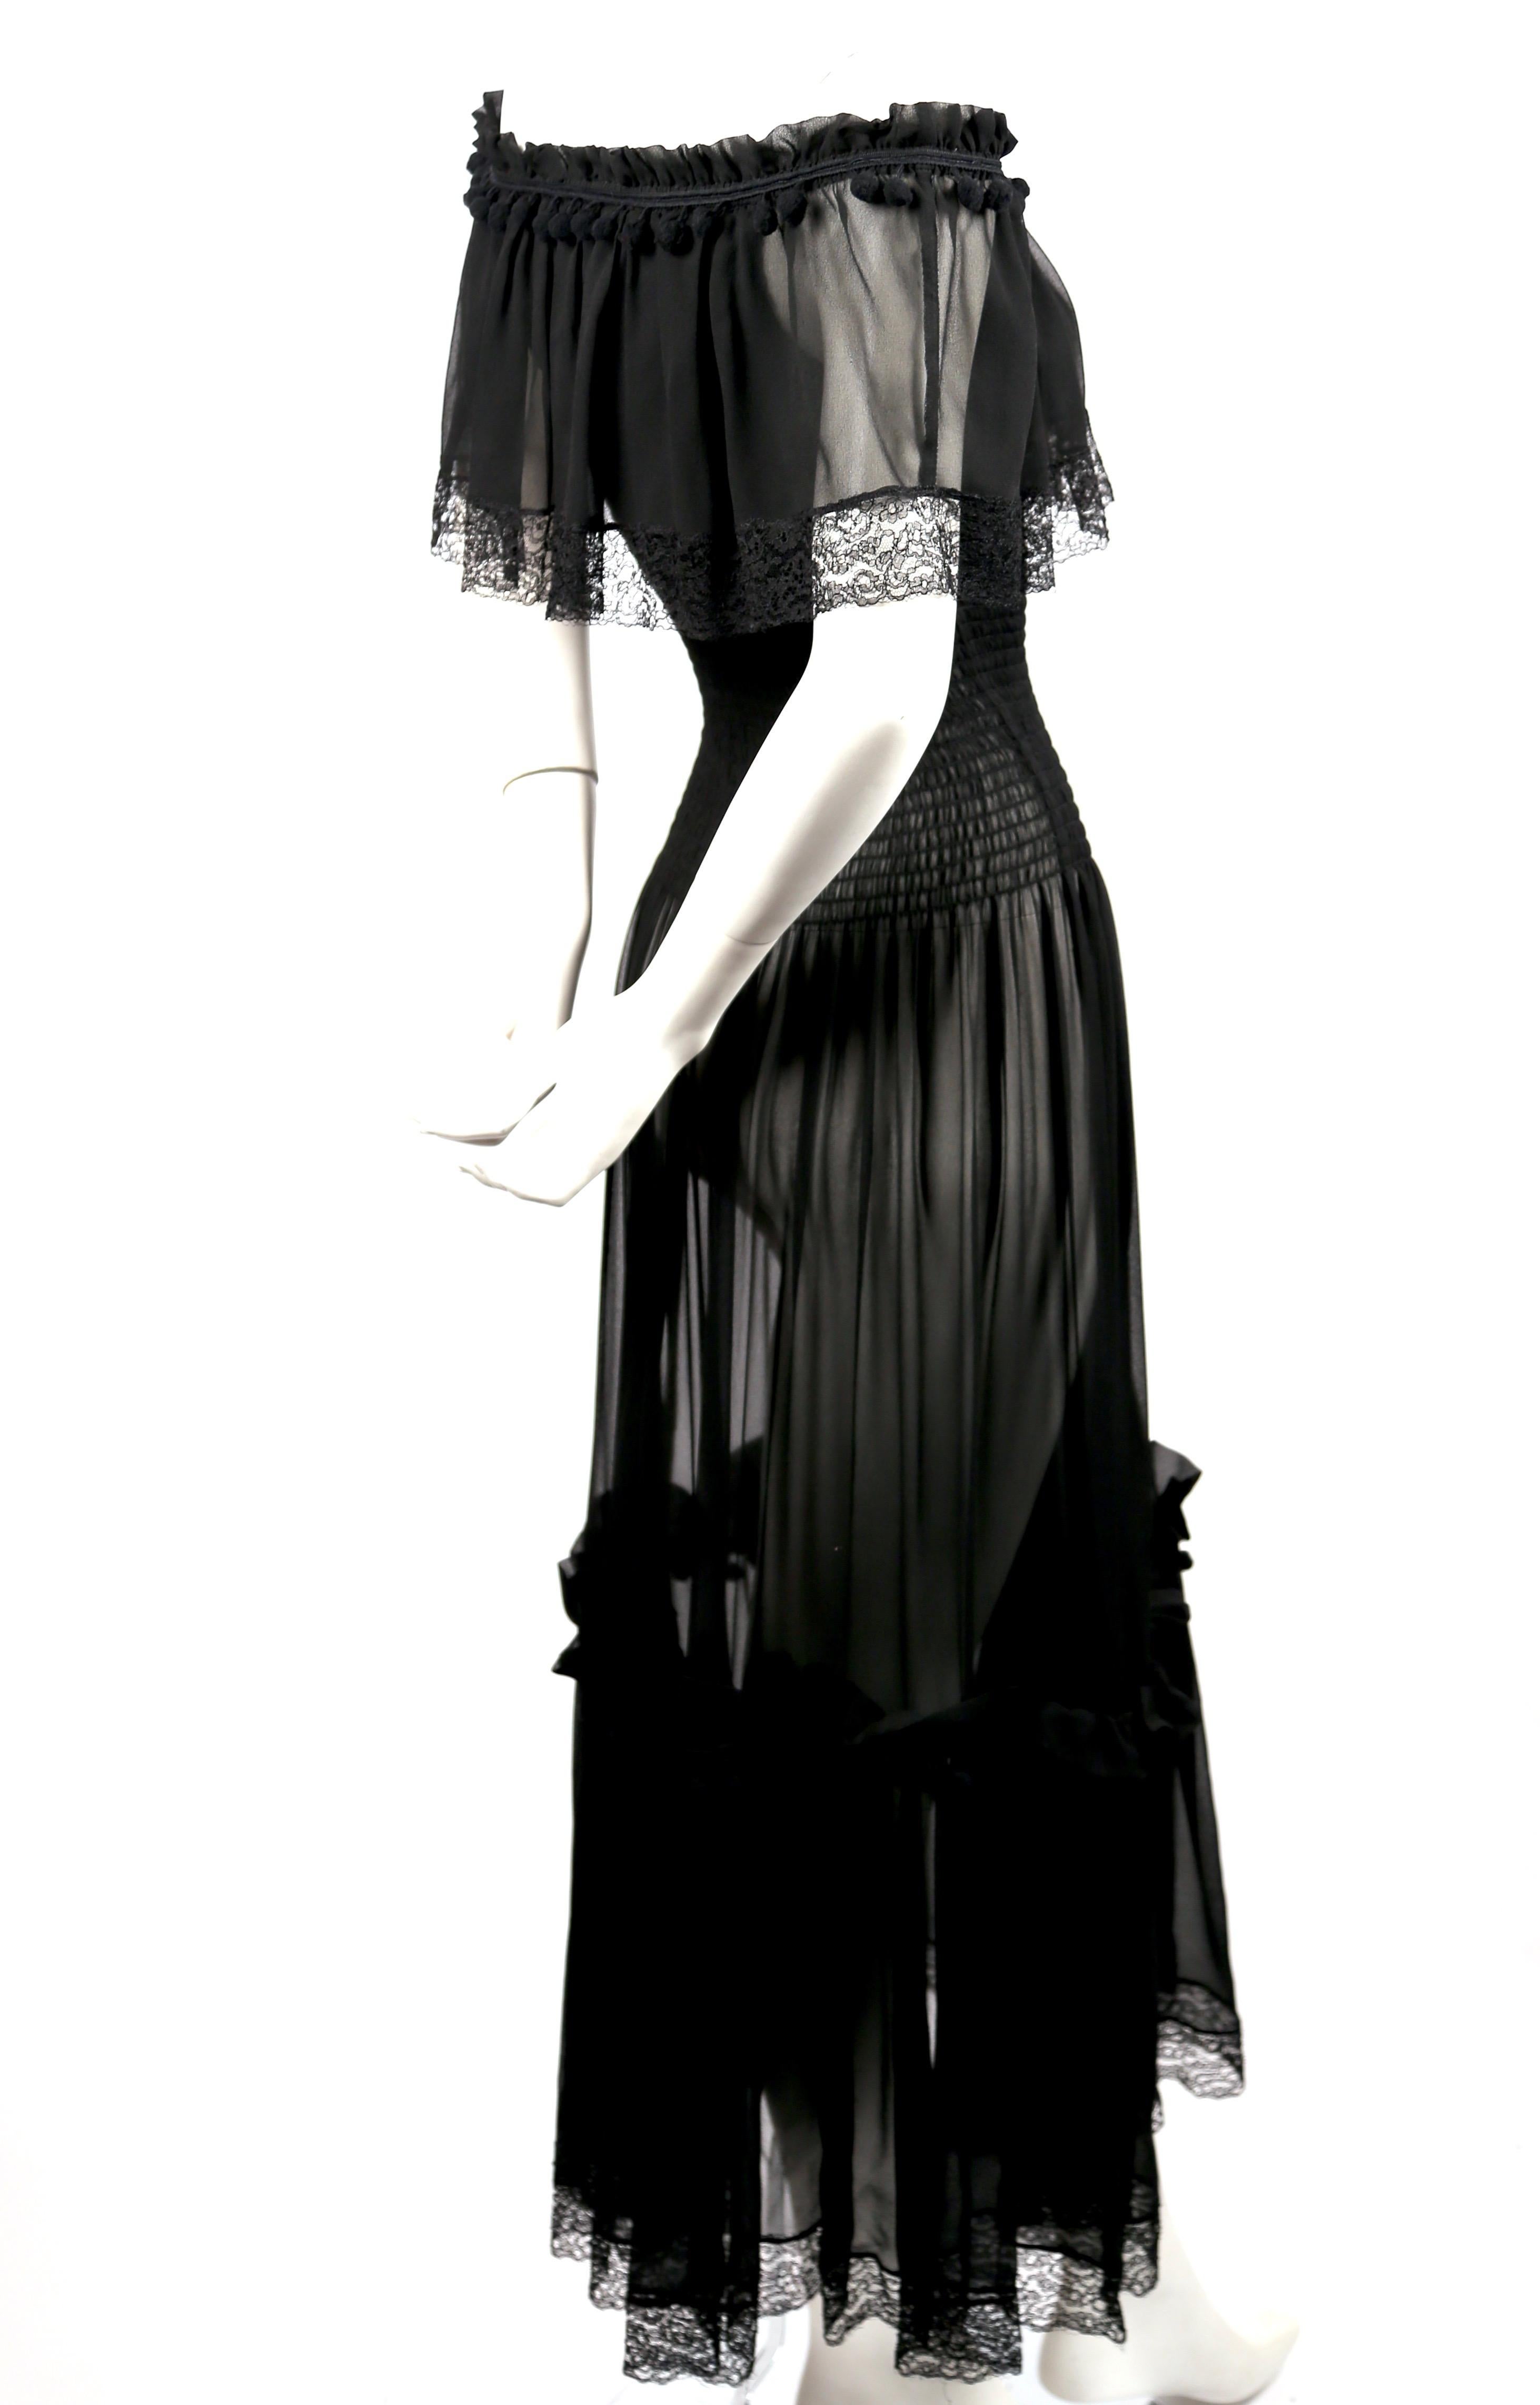 Very rare, semi-sheer, black, silk-chiffon peasant dress with lace trim, pom pom accents and smocked bodice designed by Yves Saint Laurent dating to the 1970's. Neckline is elasticized to be worn off the shoulders. French size 34. Approximate